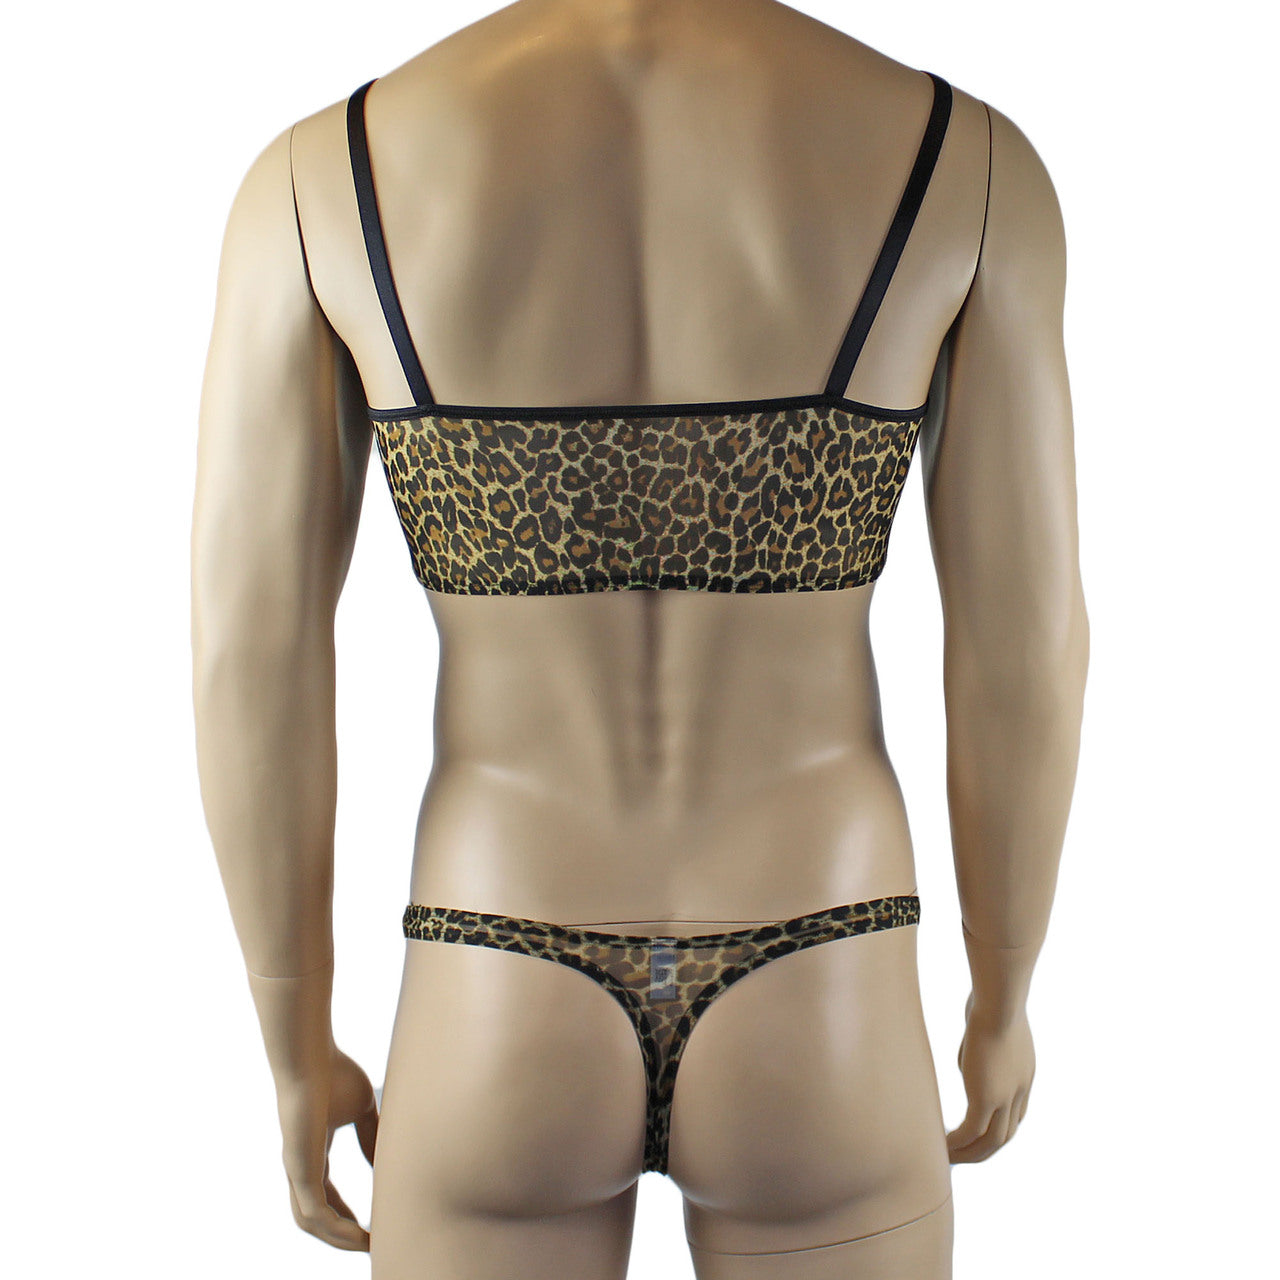 LAST ORDERS - Mens Leopard Lingerie Animal Print Camisole Top & Thong